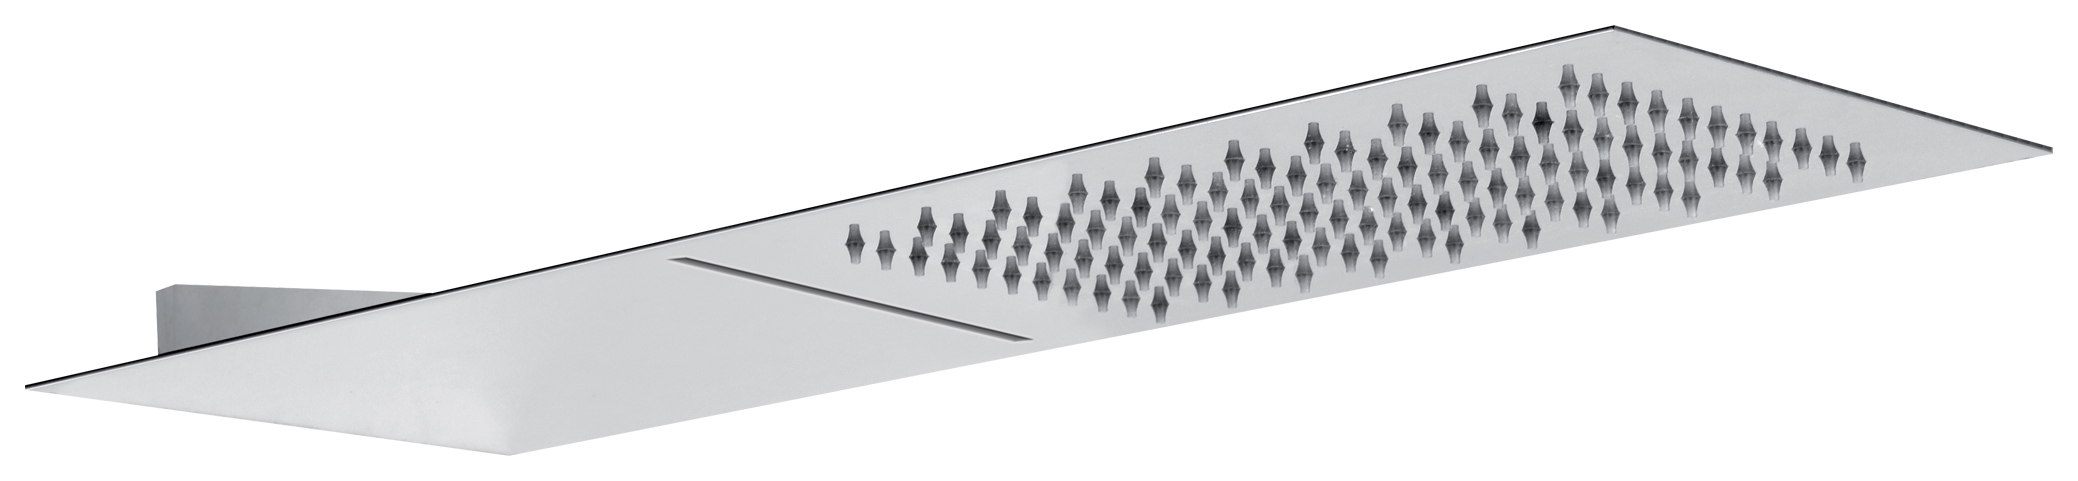 Image of Abode Storm Slimline 3mm Wall Mounted Waterfall Shower Head - 500 x 250mm